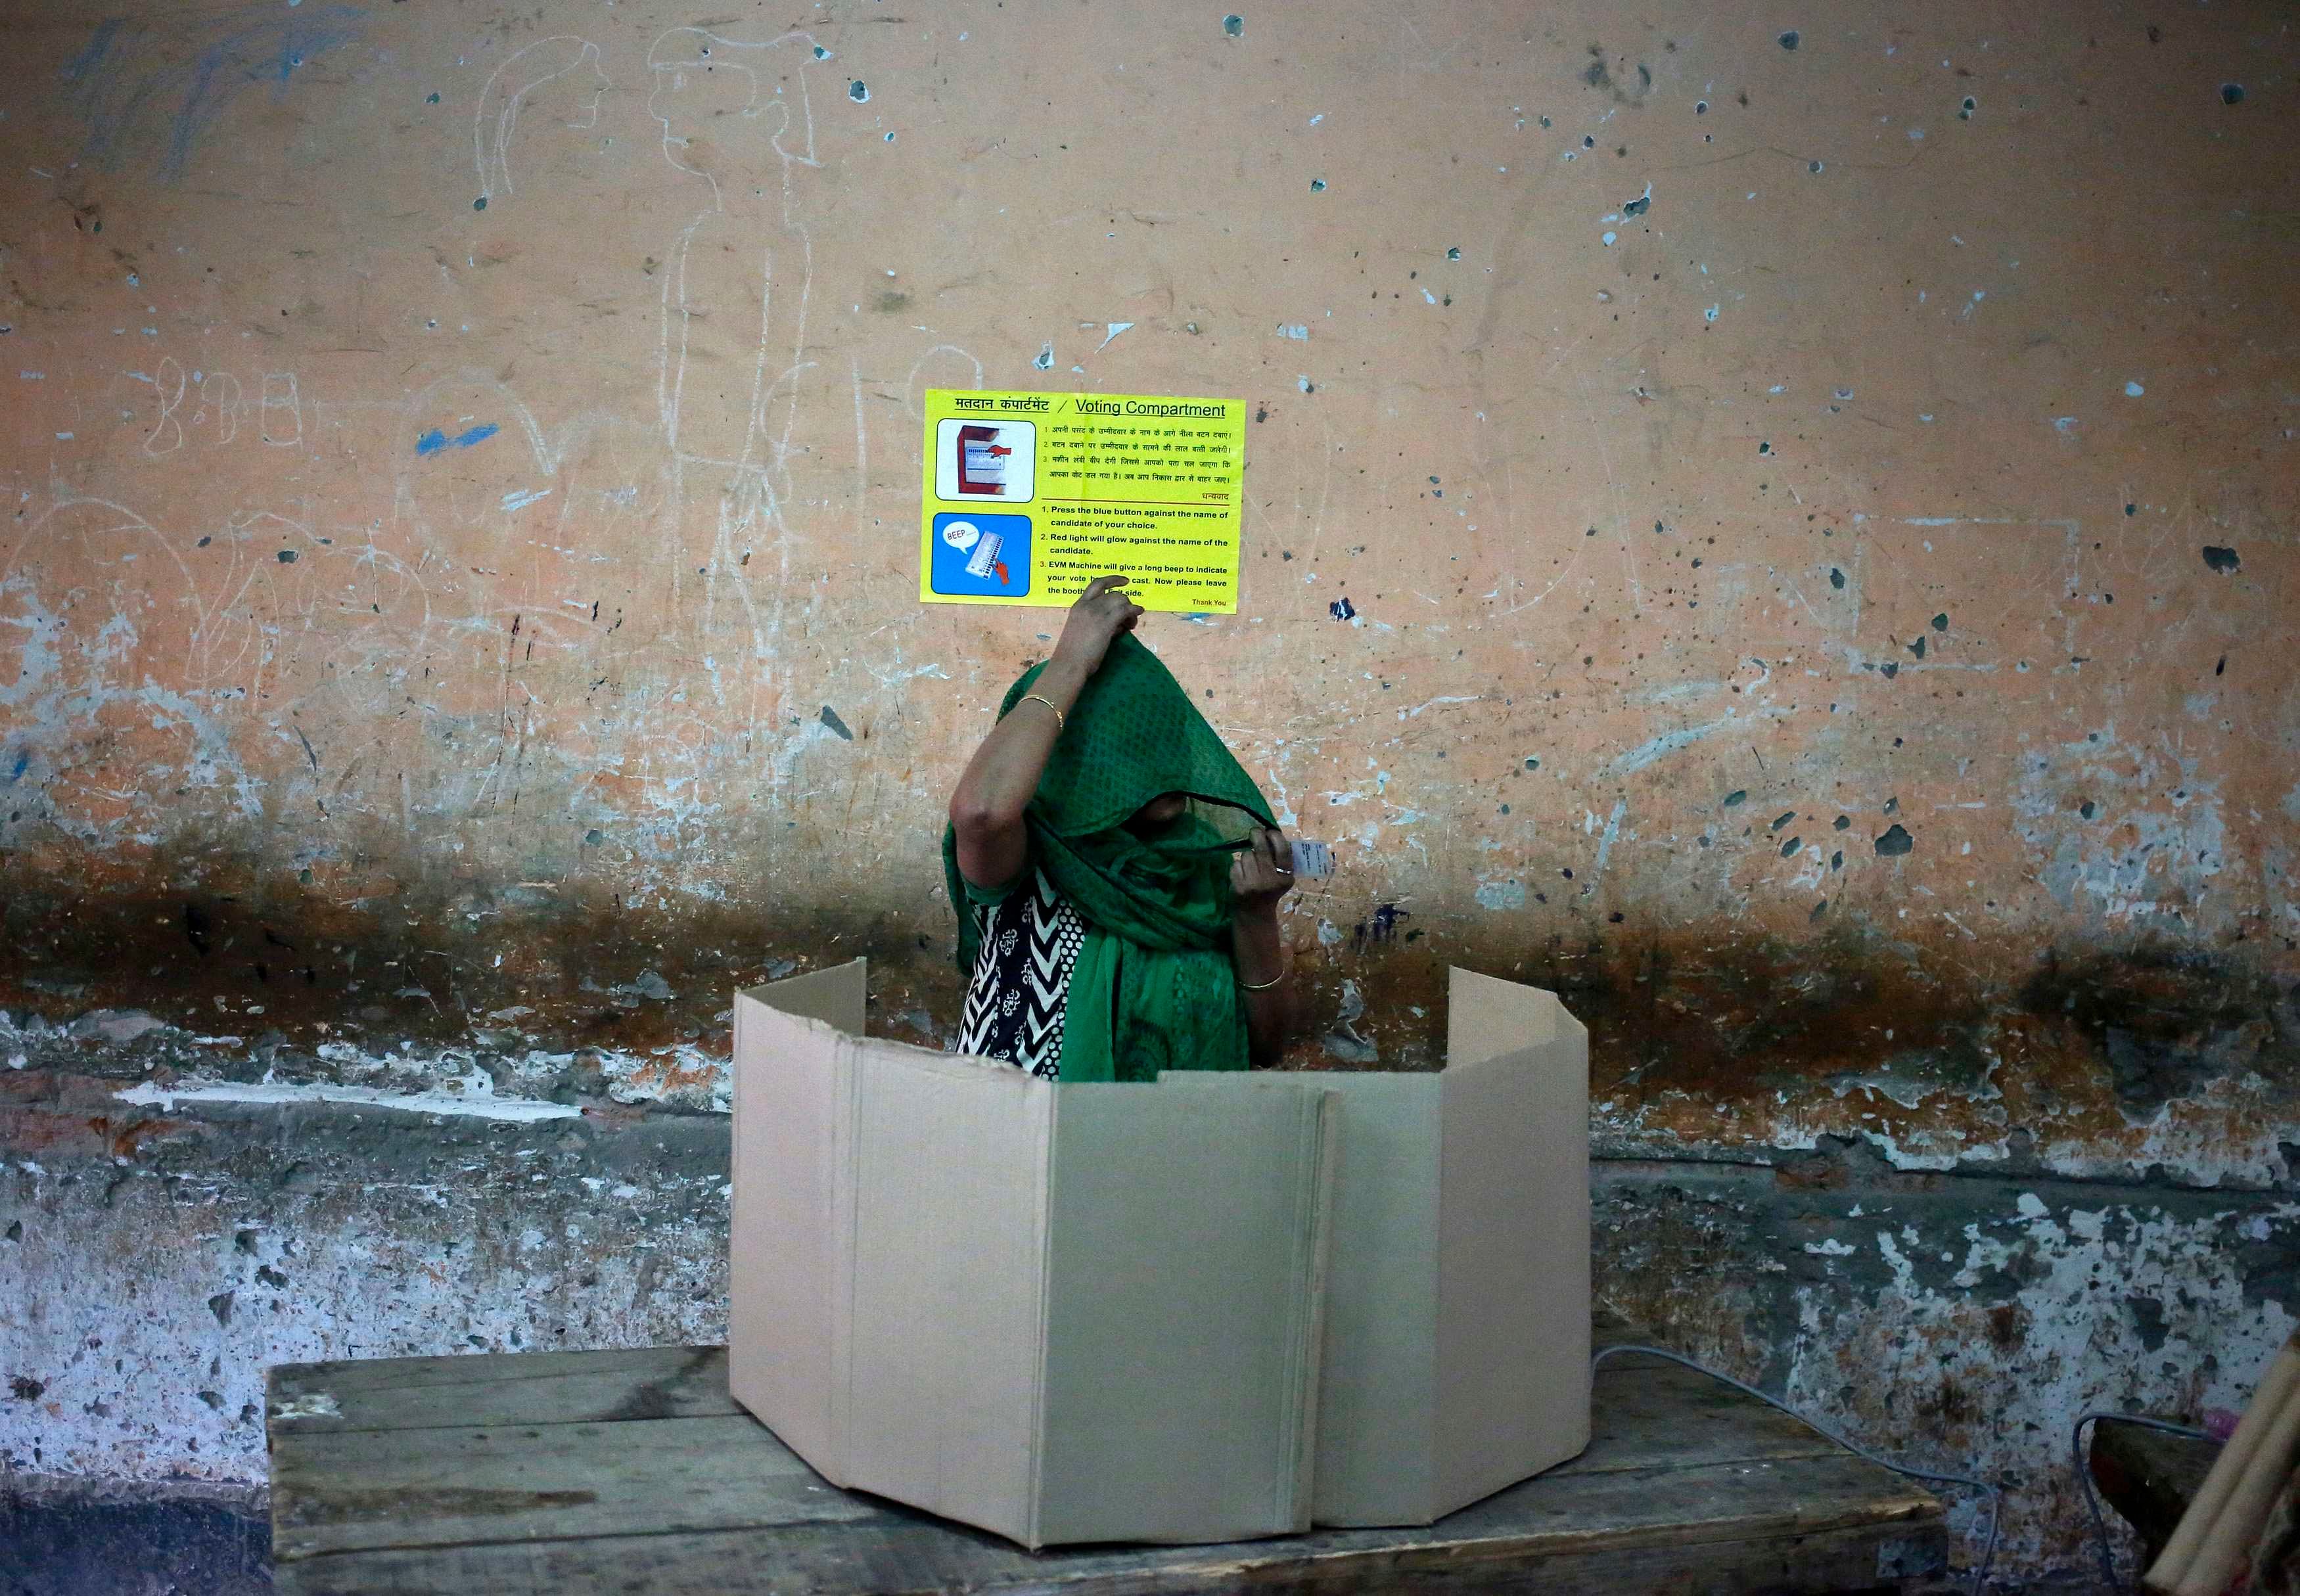 1.	A voter prepares to cast her vote at a polling station during the state assembly election in New Delhi February 7, 2015. Photo: Reuters